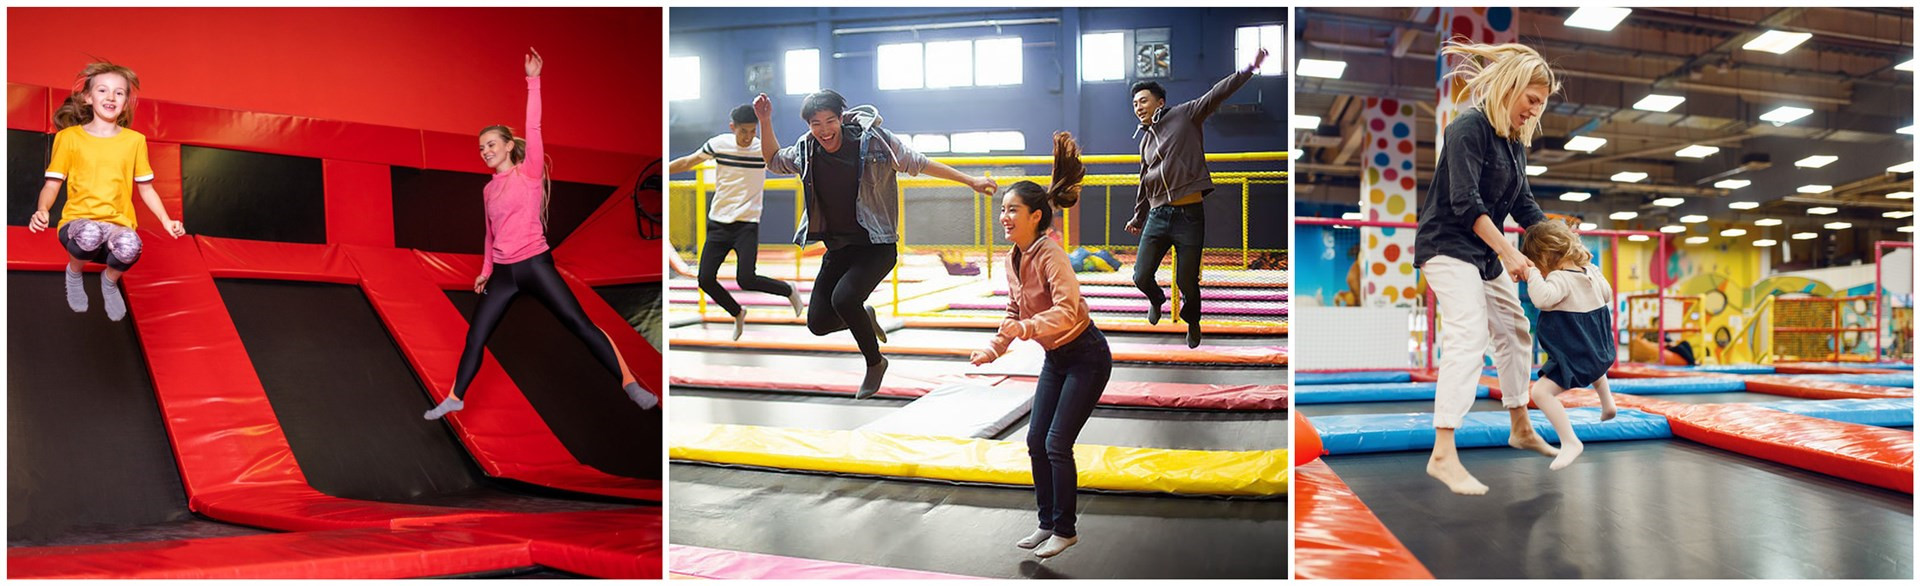 Indoor Trampoline Park to Kids and Adults 